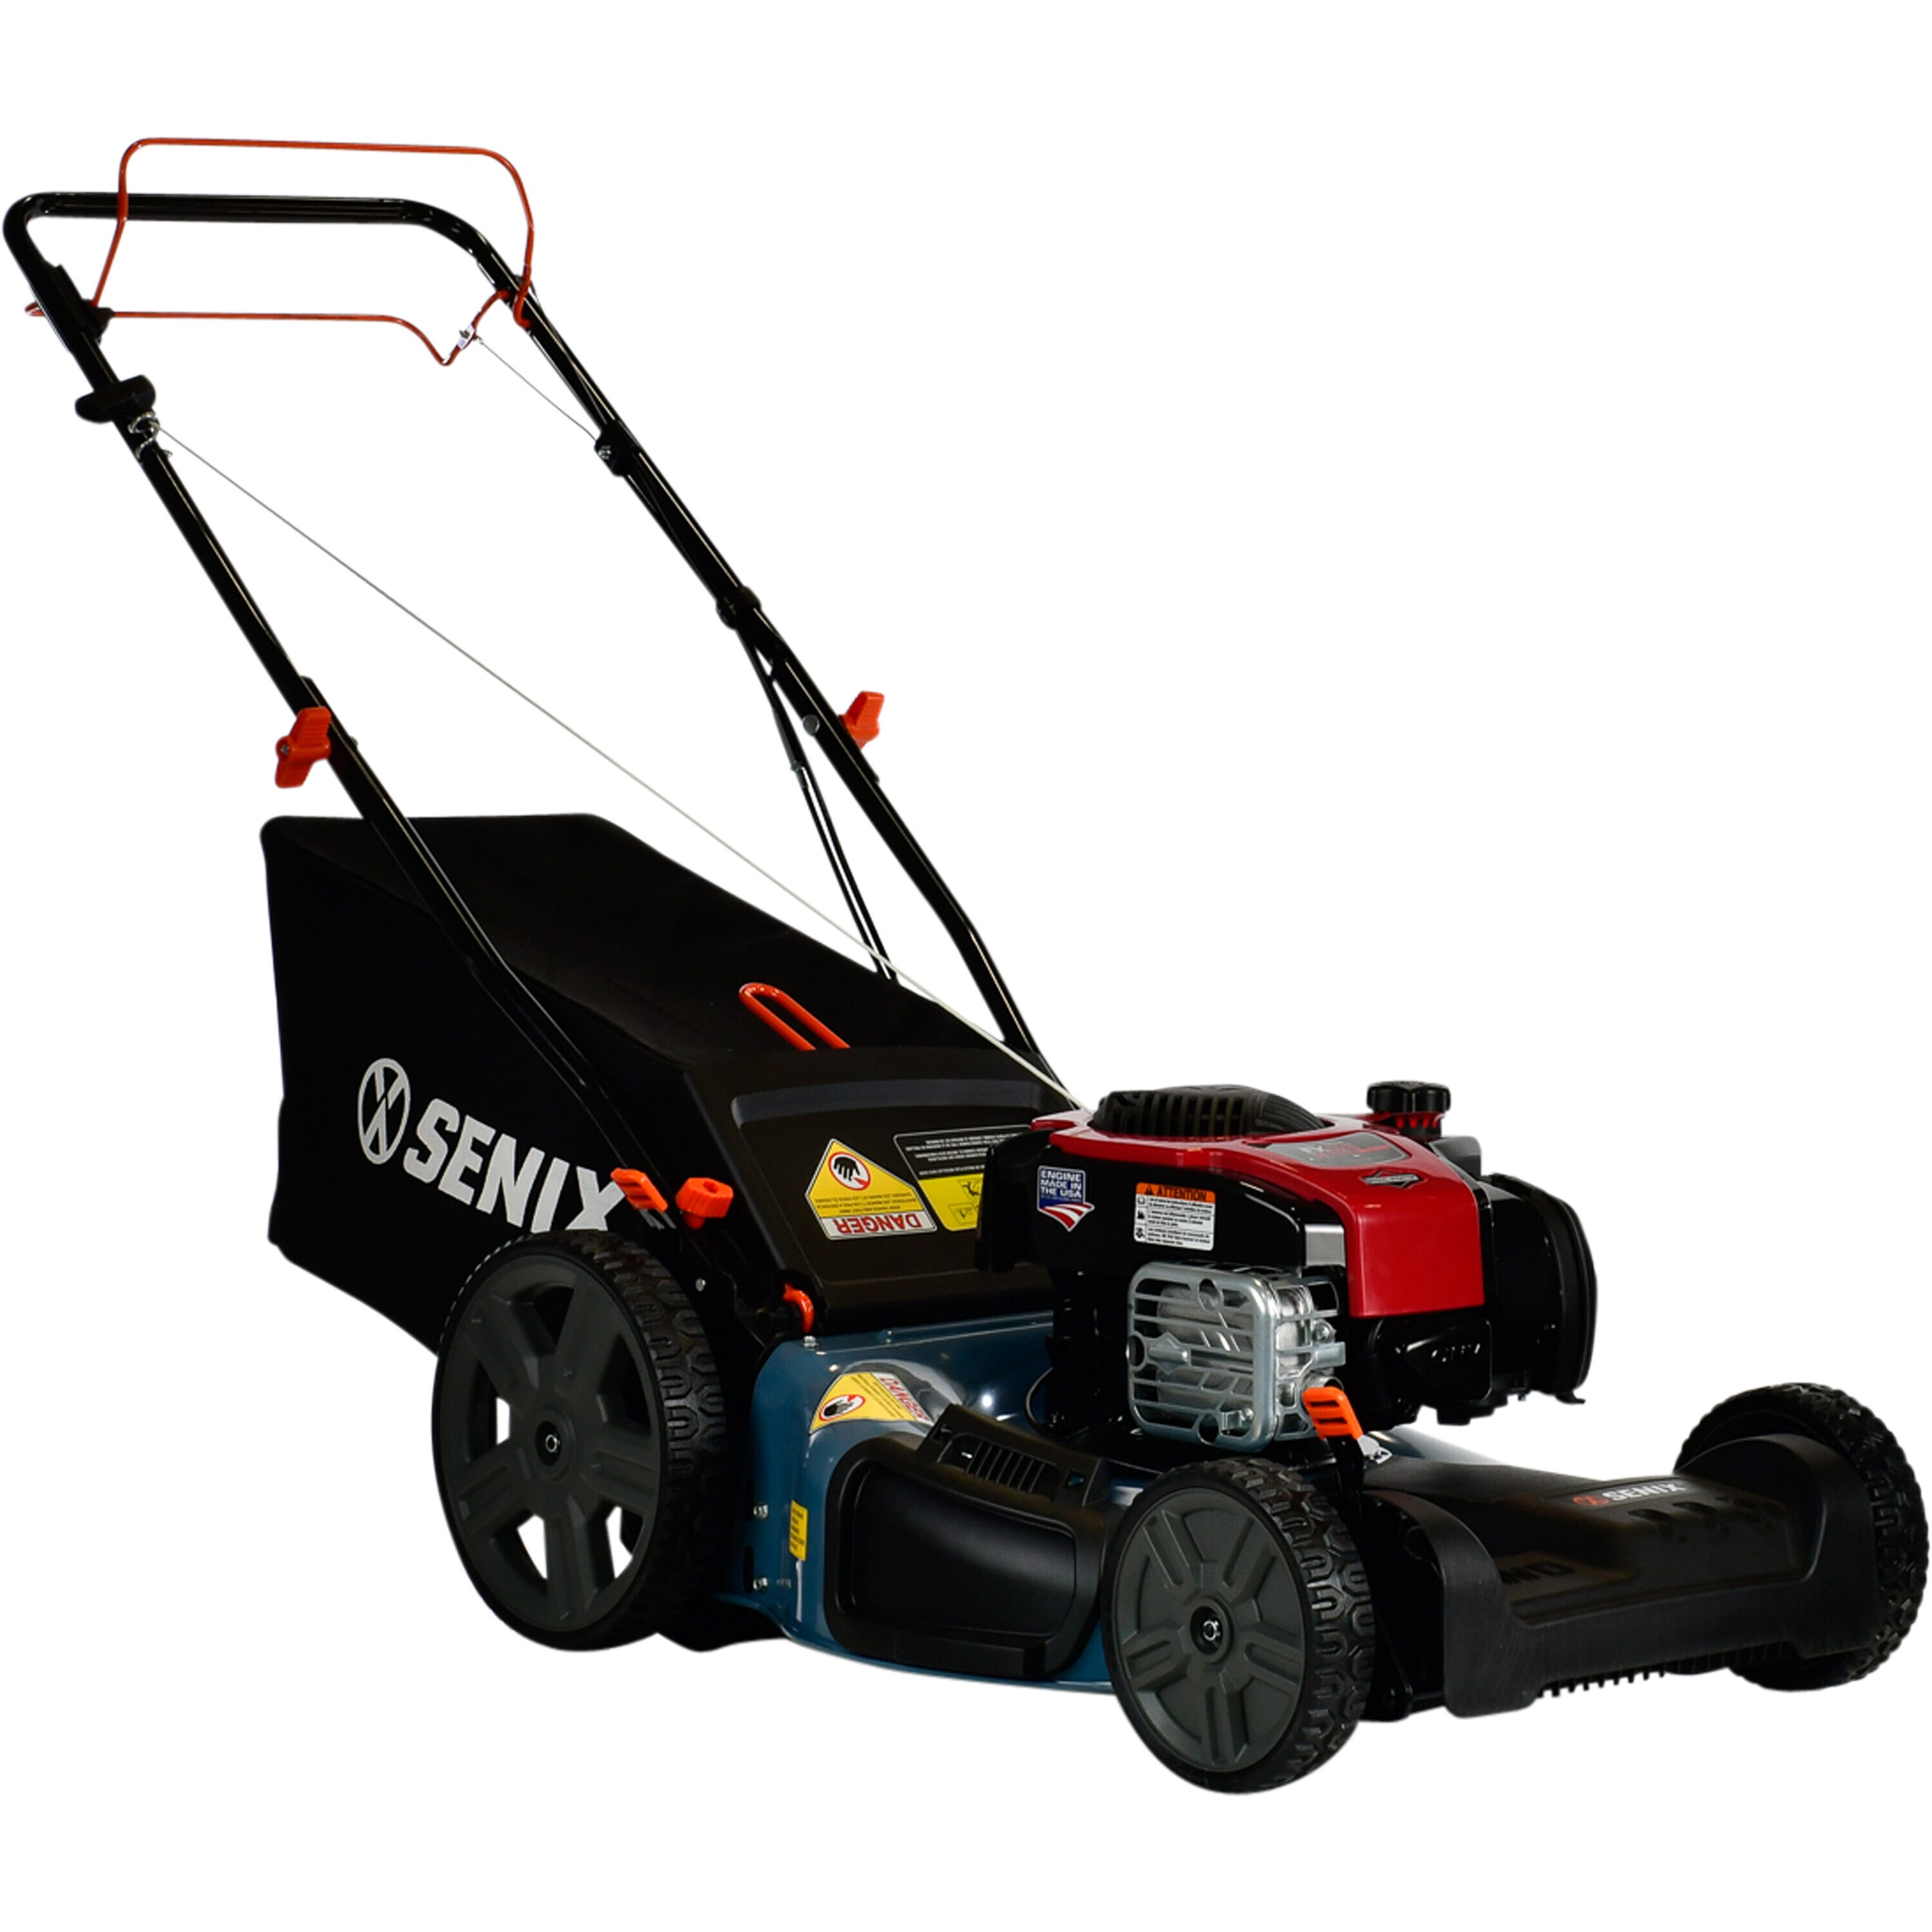 SENIX 21-in Gas Self-propelled Lawn Mower with 150-cc Briggs 